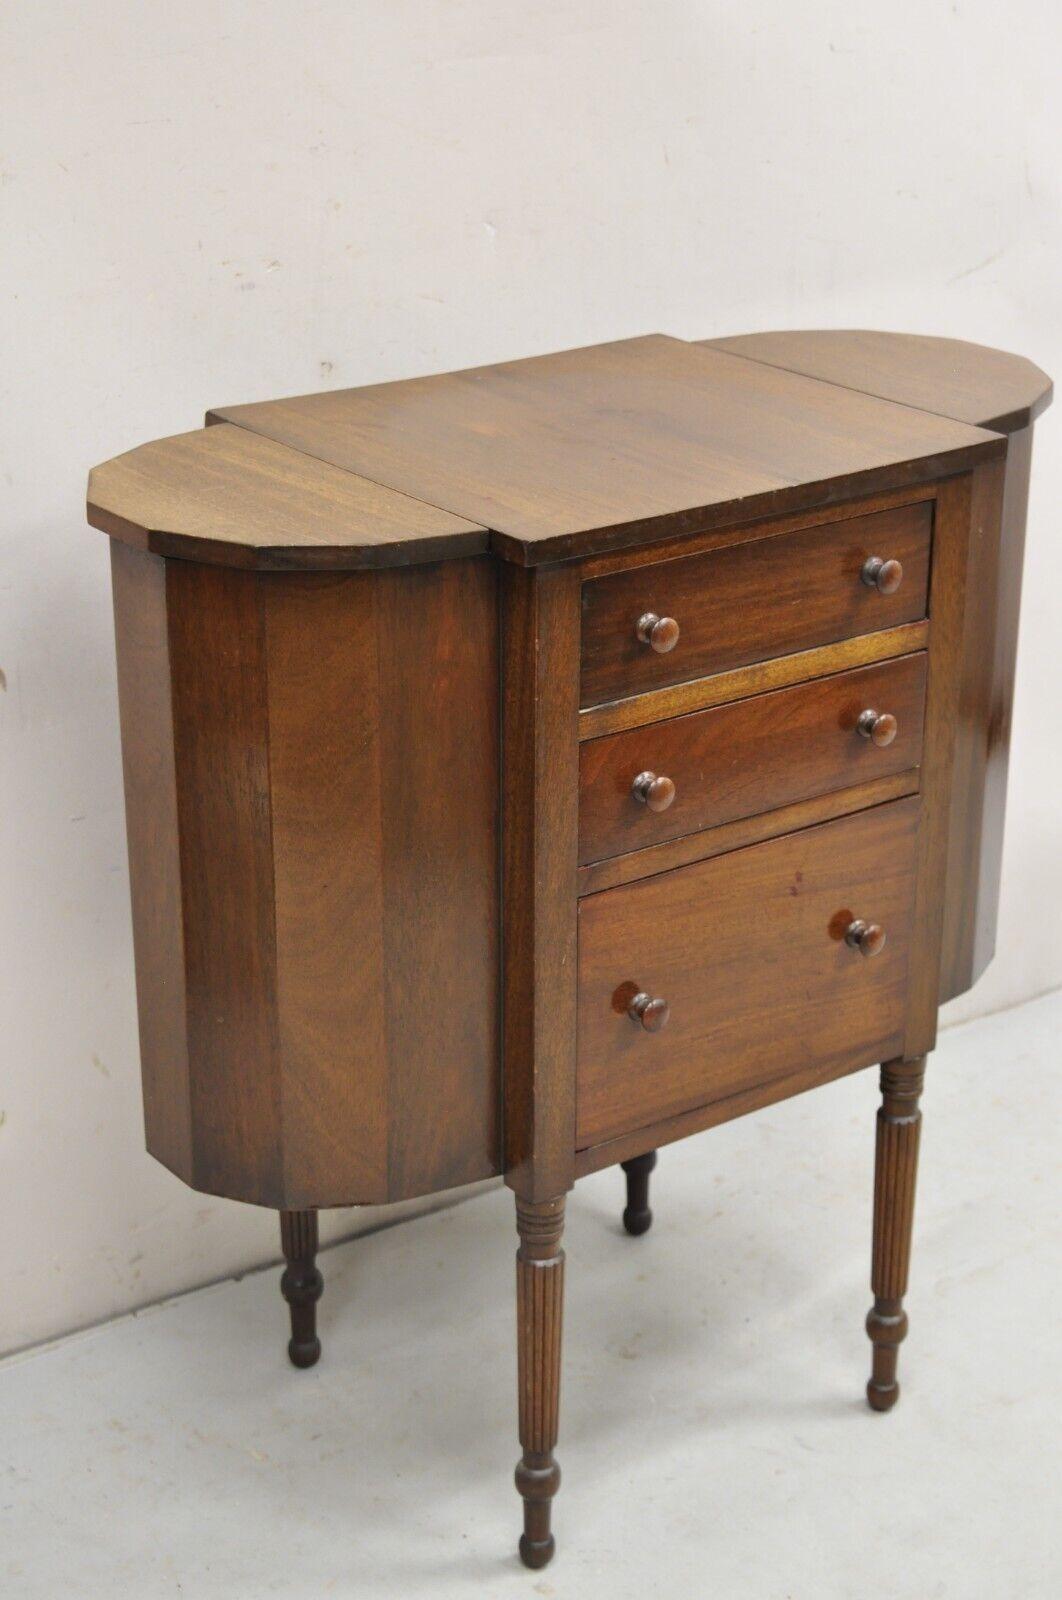 Vintage Martha Washington Colonial Style Mahogany Sewing Stand Side Table Cabinet. Item features solid wood construction, 3 dovetailed drawers, 2 flip tops, removable legs, nice vintage sewing cabinet. Circa Early 20th Century. Measurements: 29